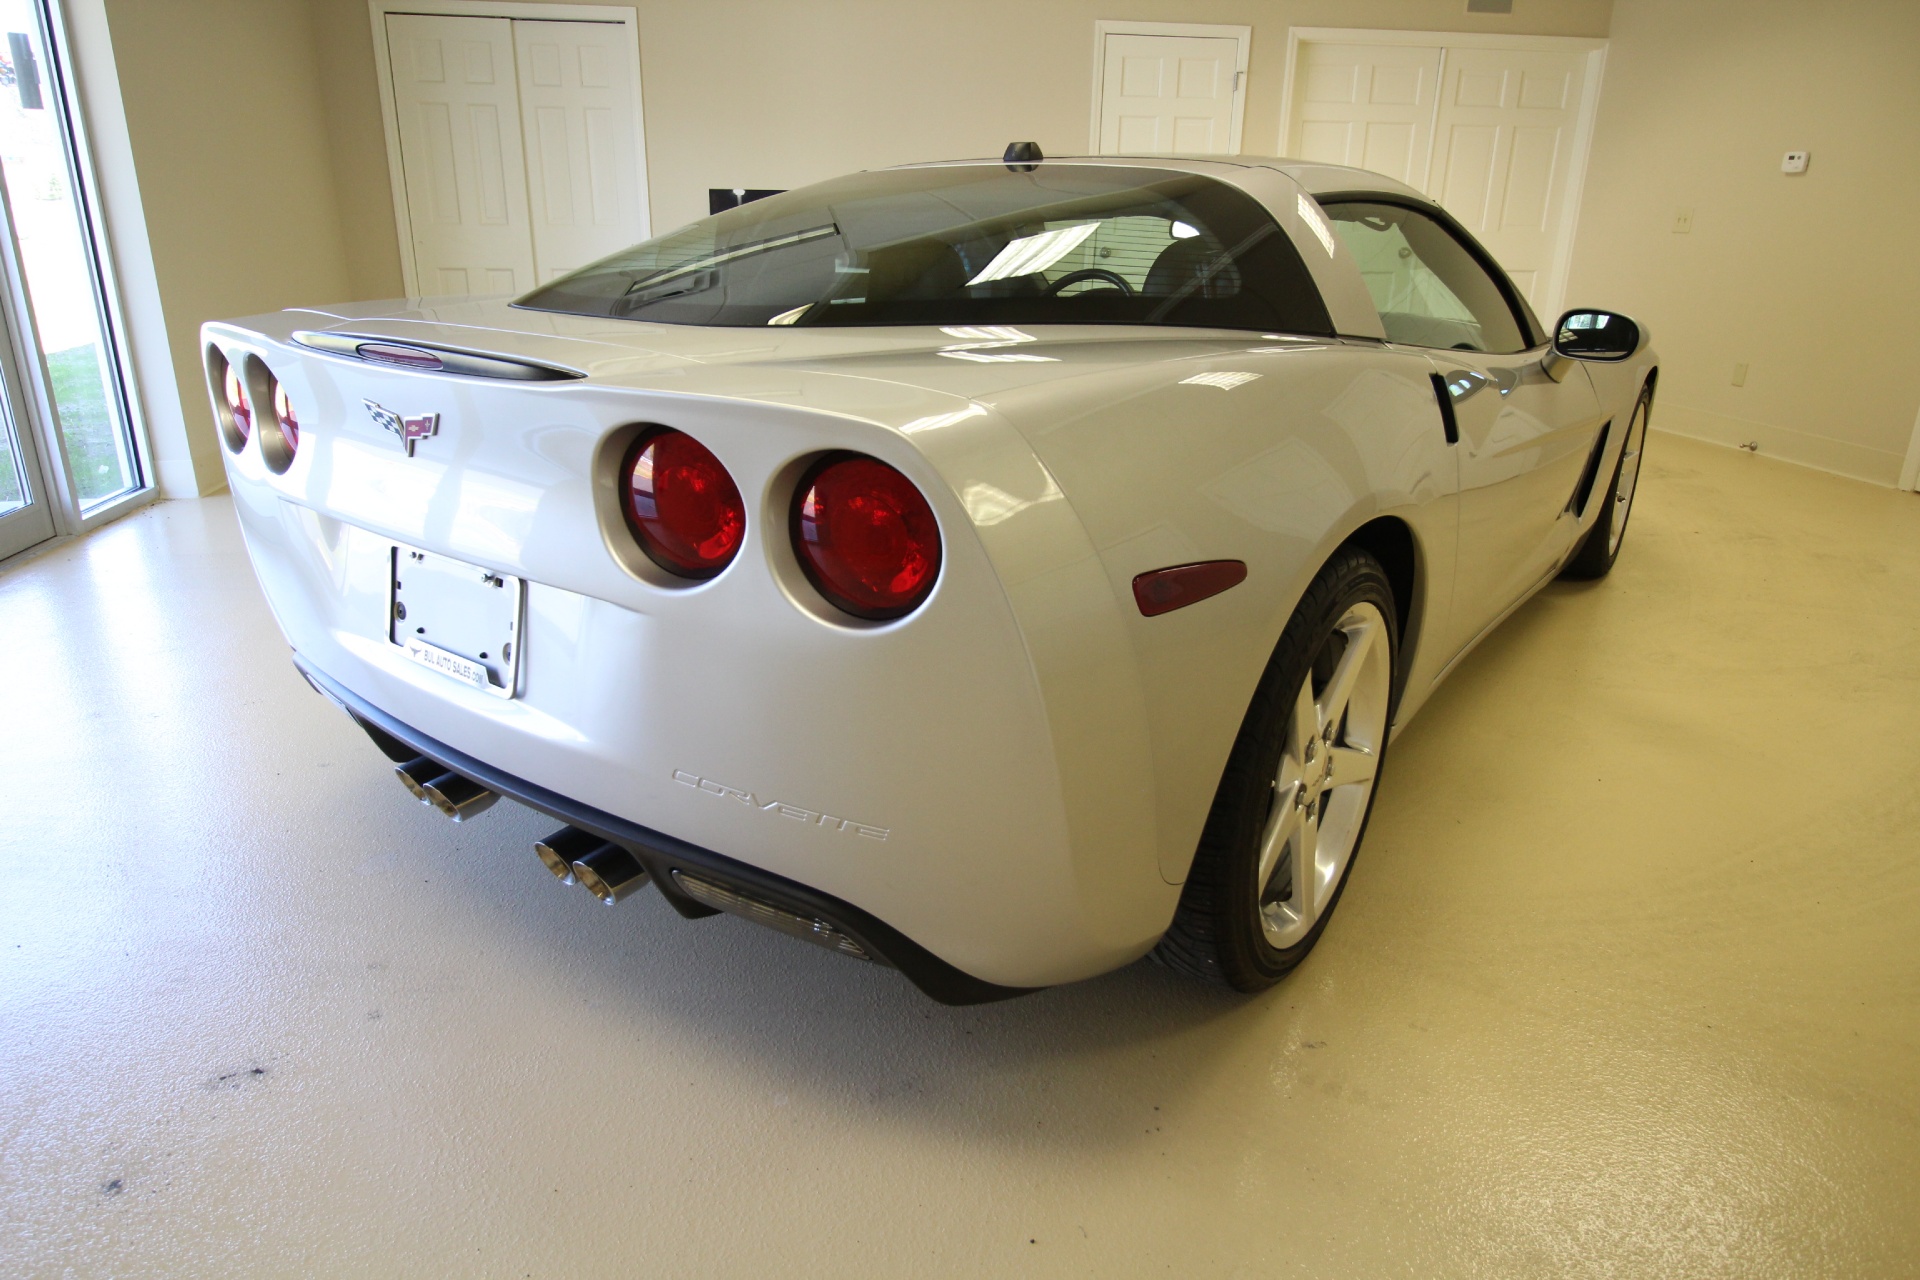 Used 2005 Silver Chevrolet Corvette 1 OWNER,LOW MILES,VERY CLEAN,HEADS-UP,SPORT SEATS AND MORE | Albany, NY